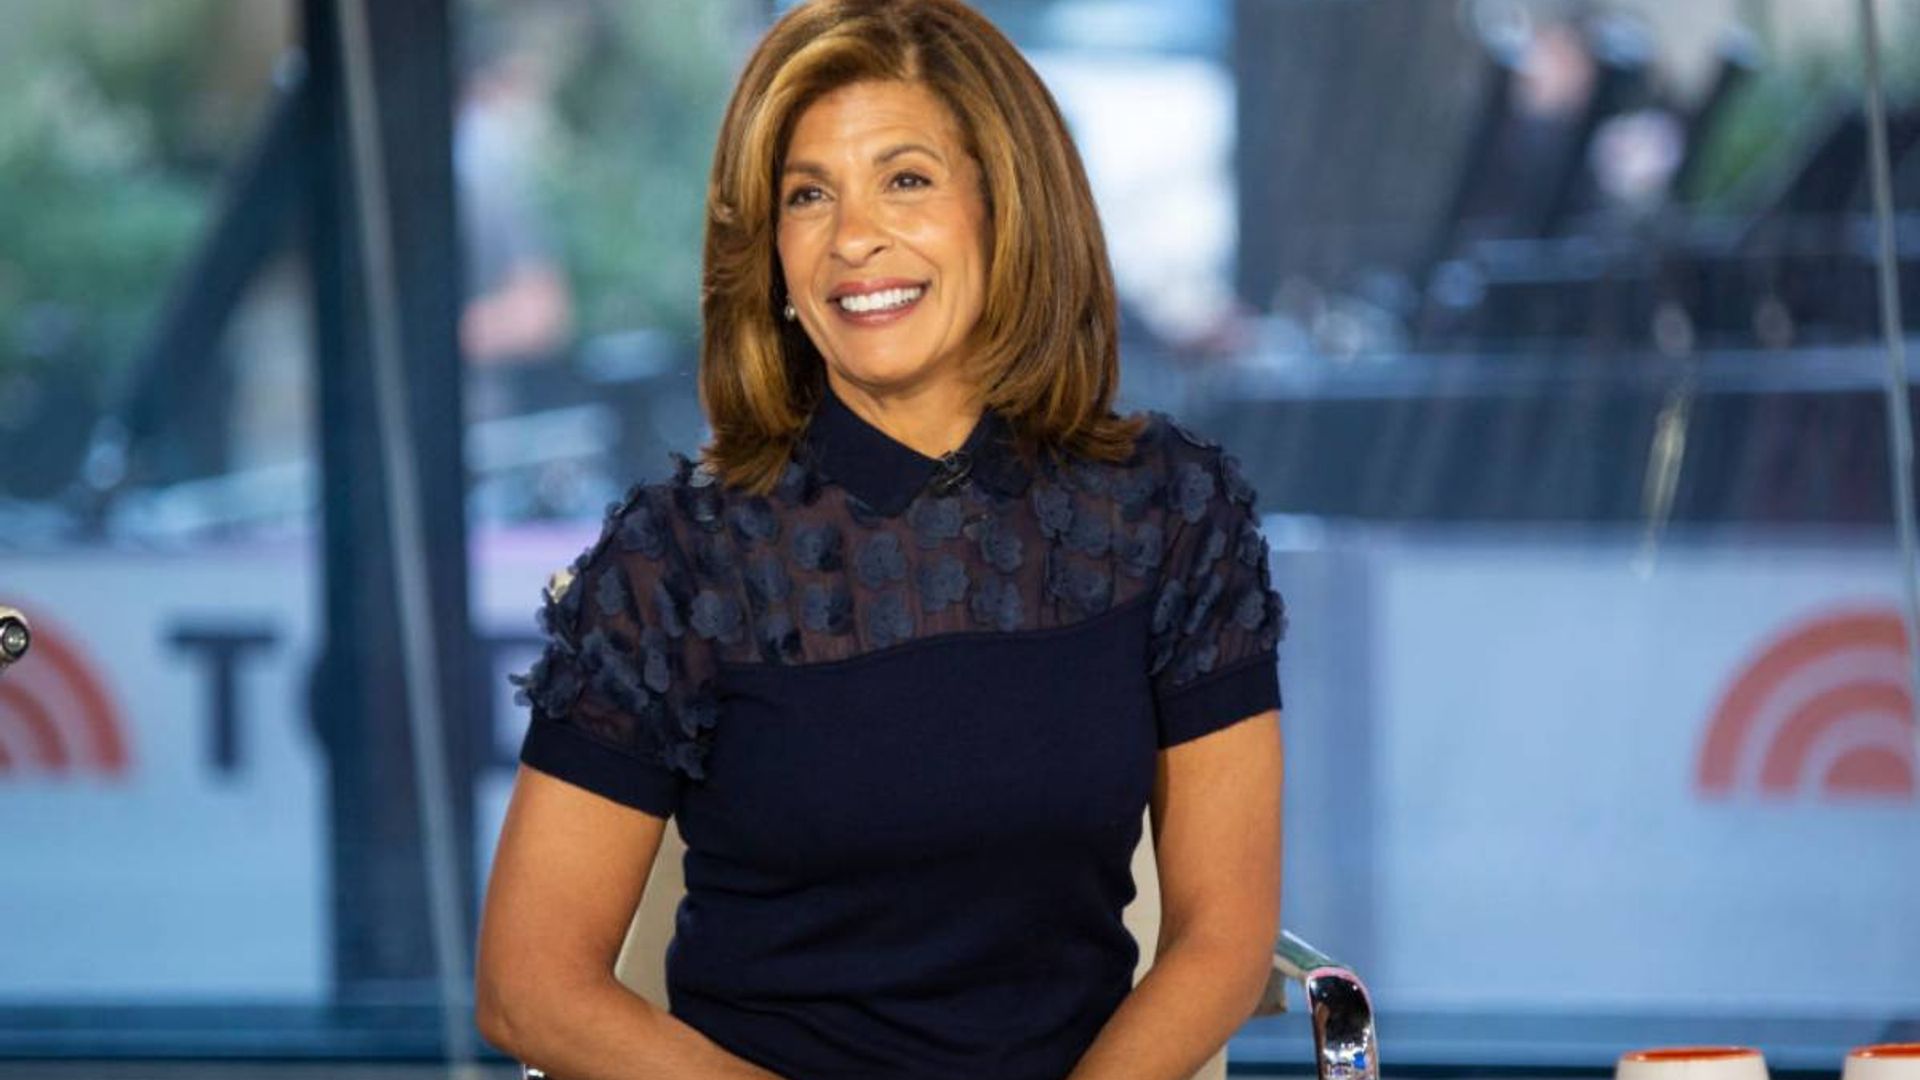 Hoda Kotb stuns co-shot with confession about family life at home